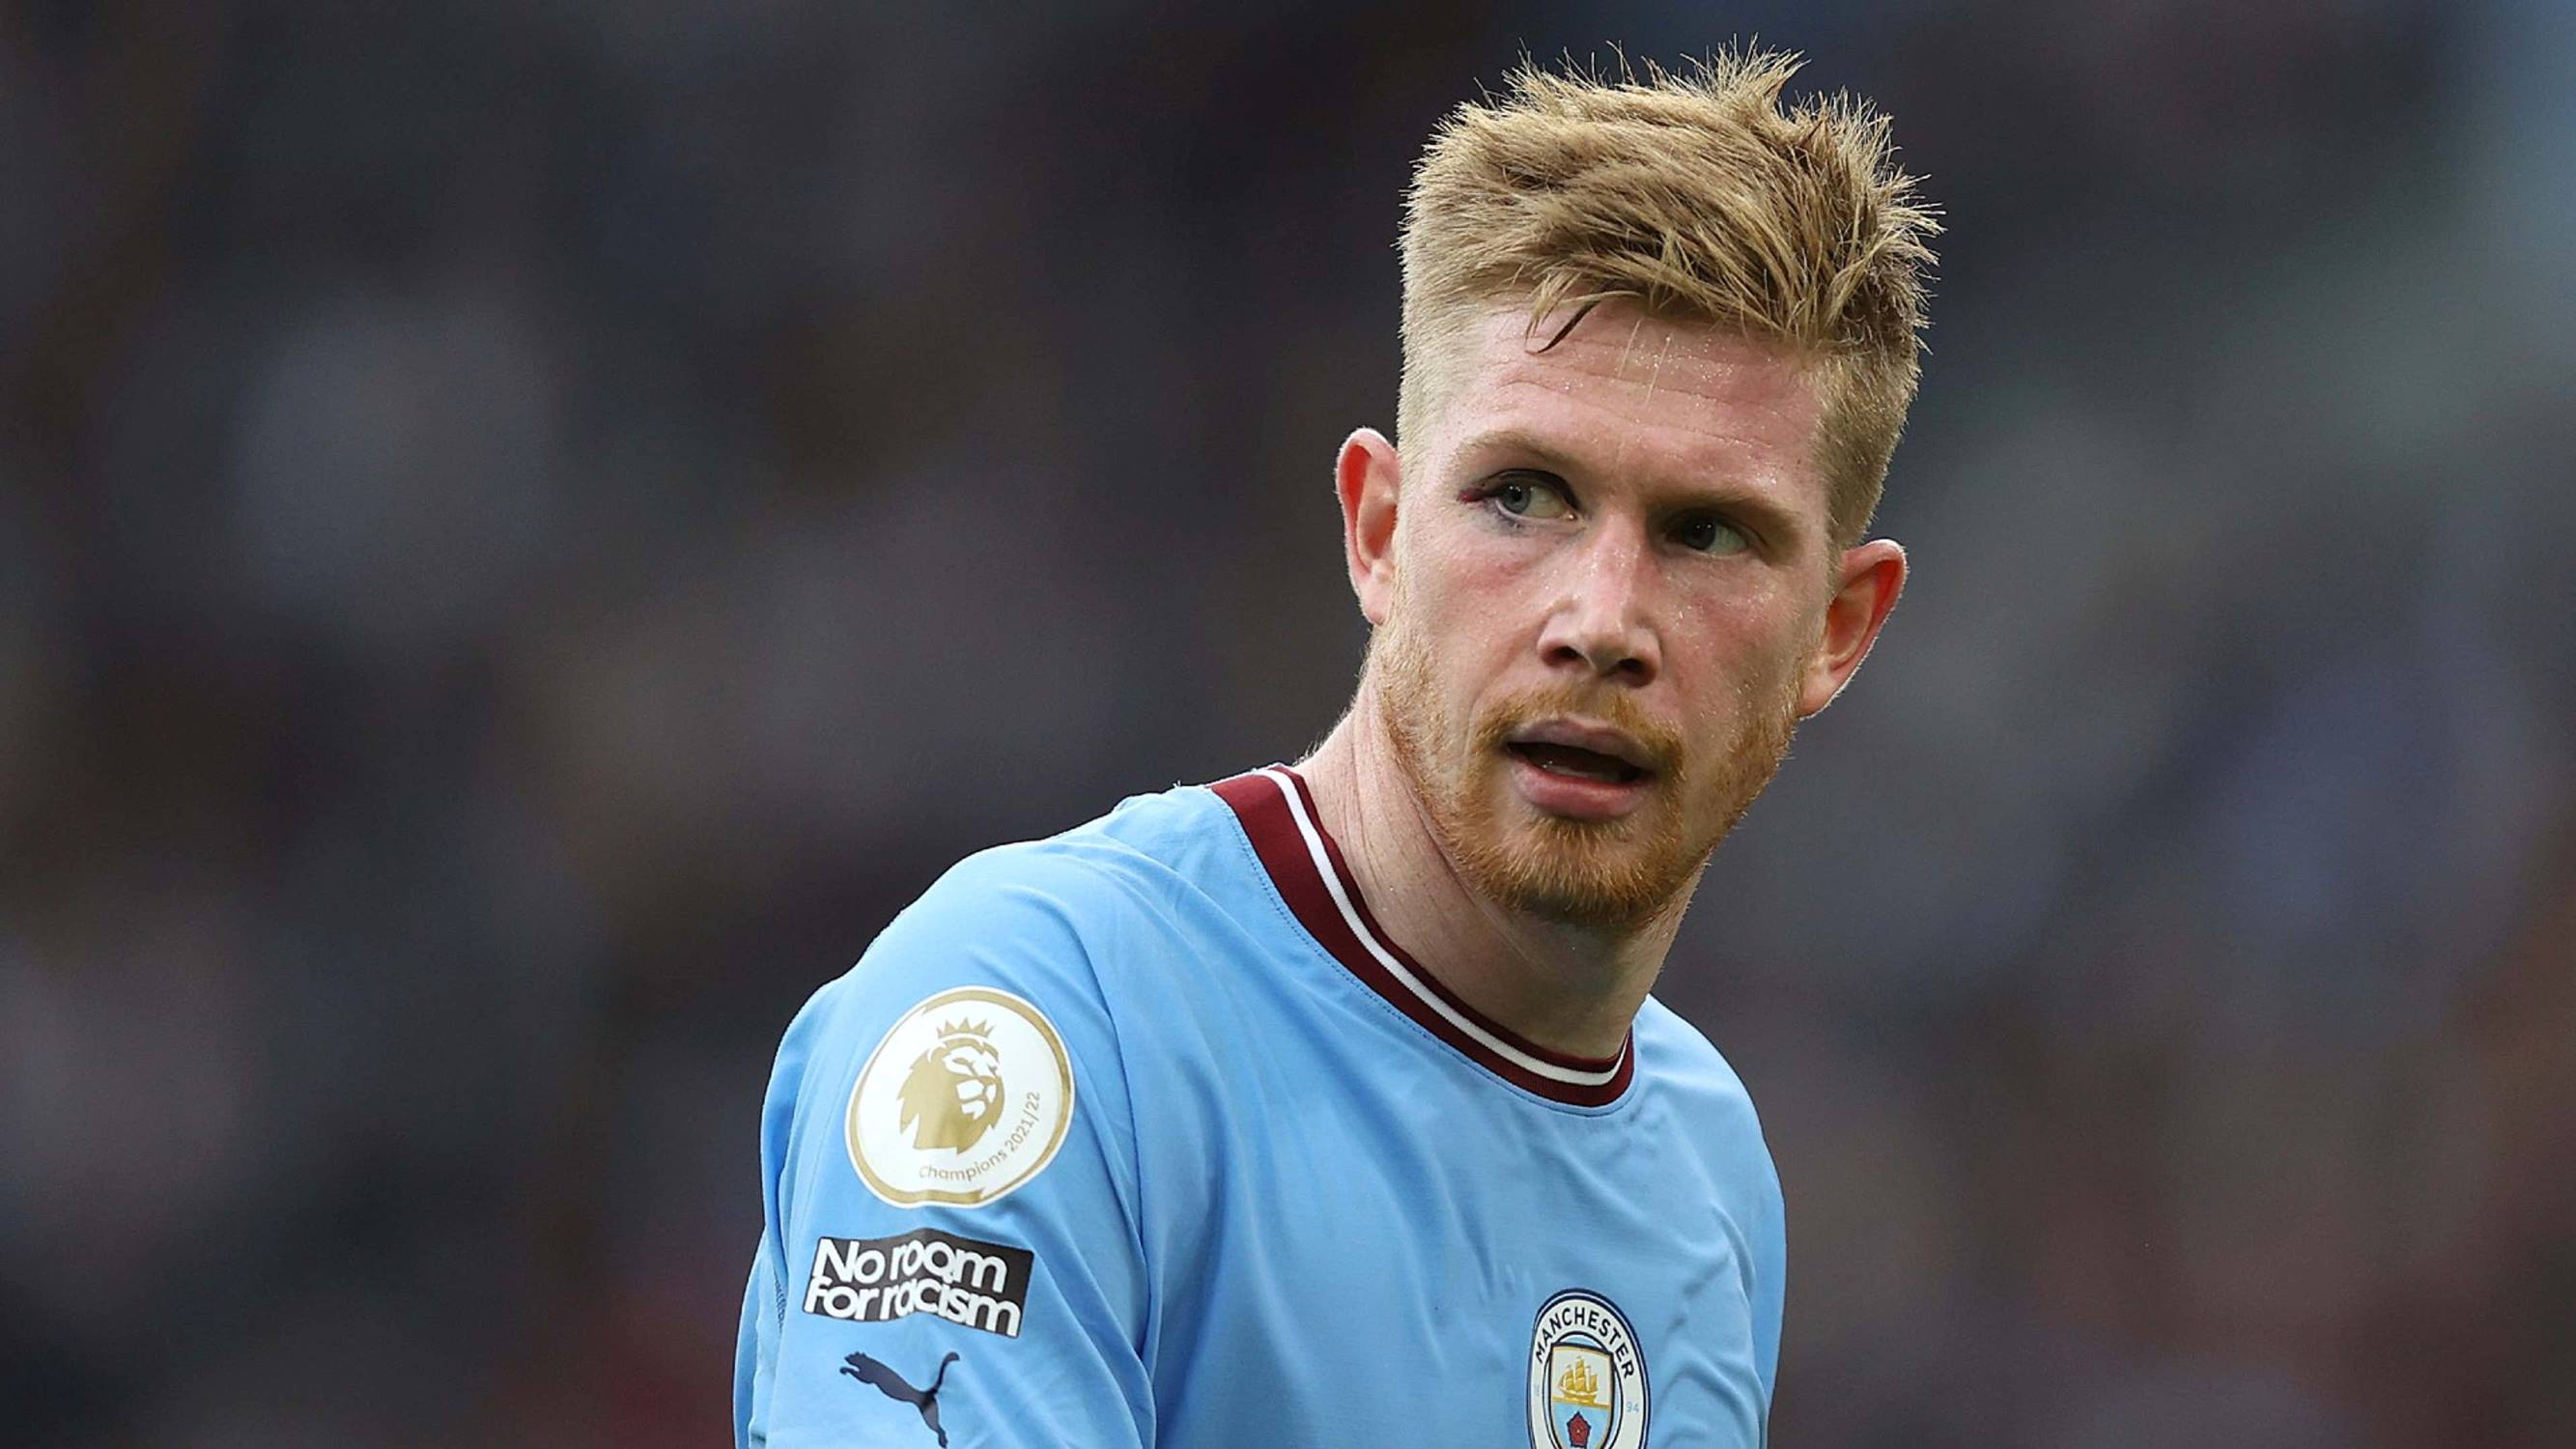 18 Mind-blowing Facts About Kevin De Bruyne - Facts.net